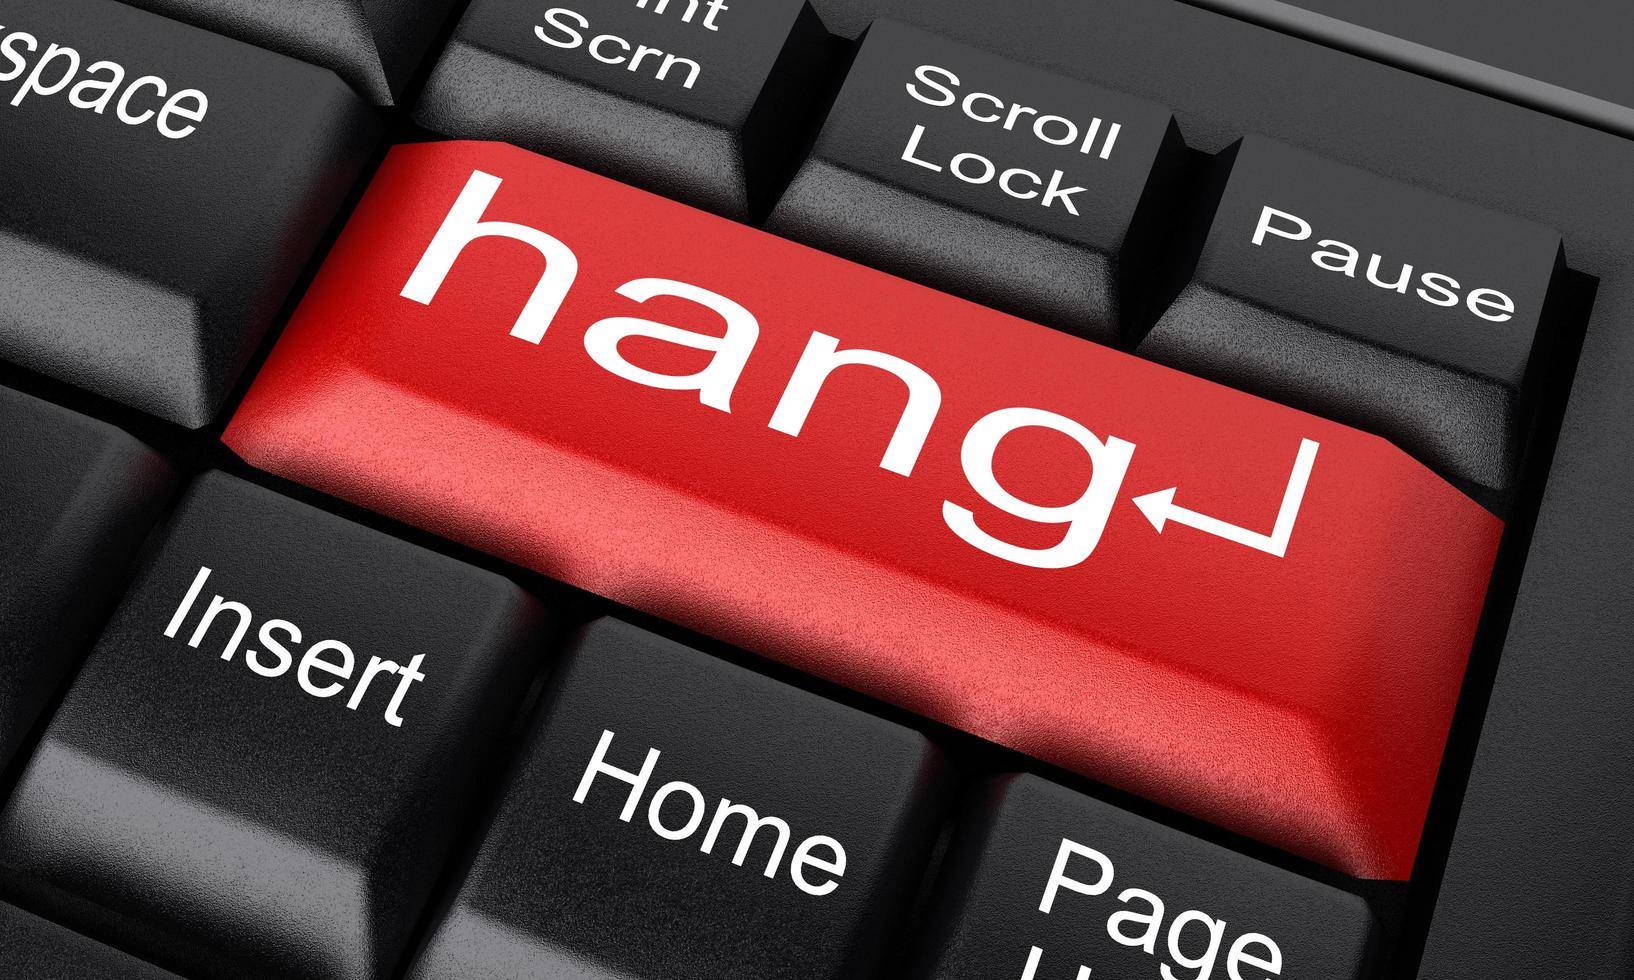 hang word on red keyboard button photo